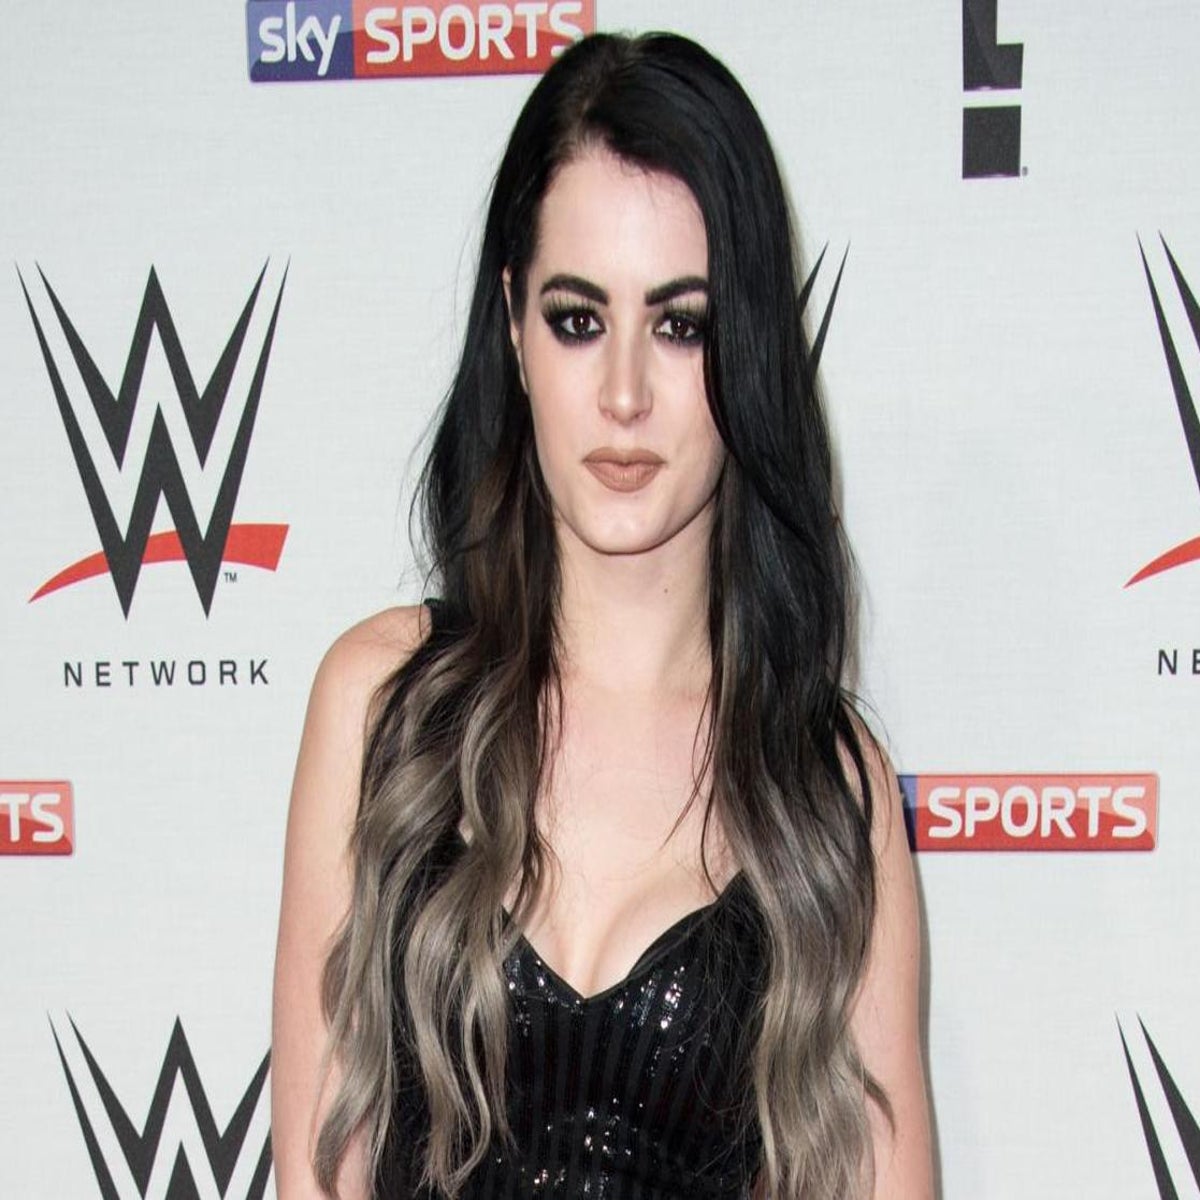 Petite Albino Teen - Paige sex tape leak caused WWE star to develop anorexia | The Independent